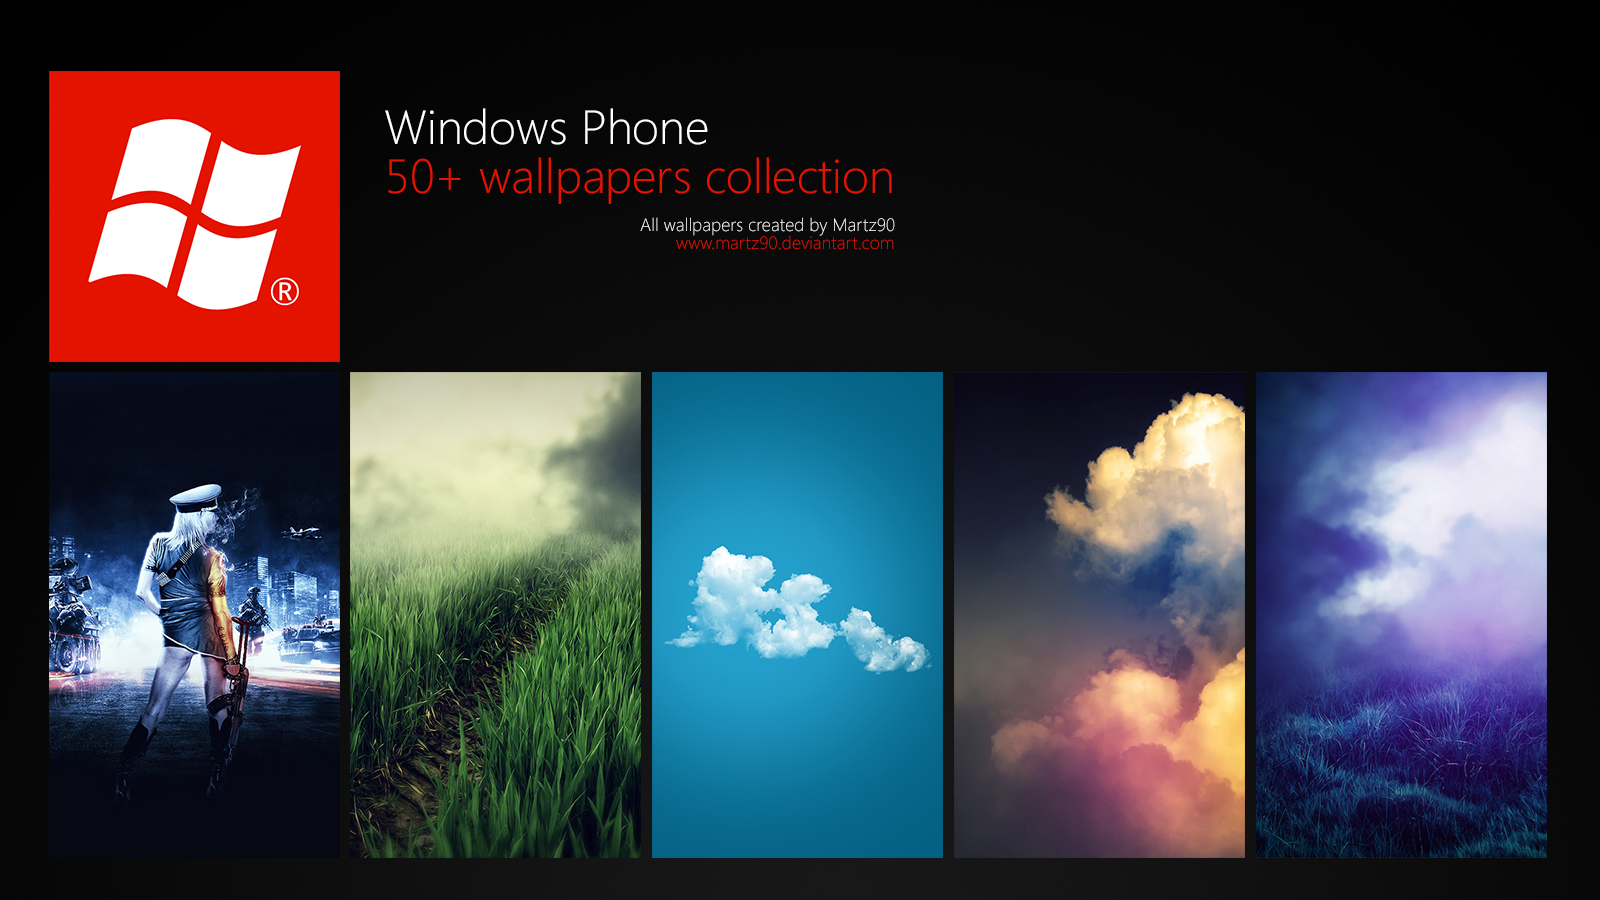 Windows Phone Wallpapers Collection by Martz90 Windows Phone Wallpapers Collection by Martz90